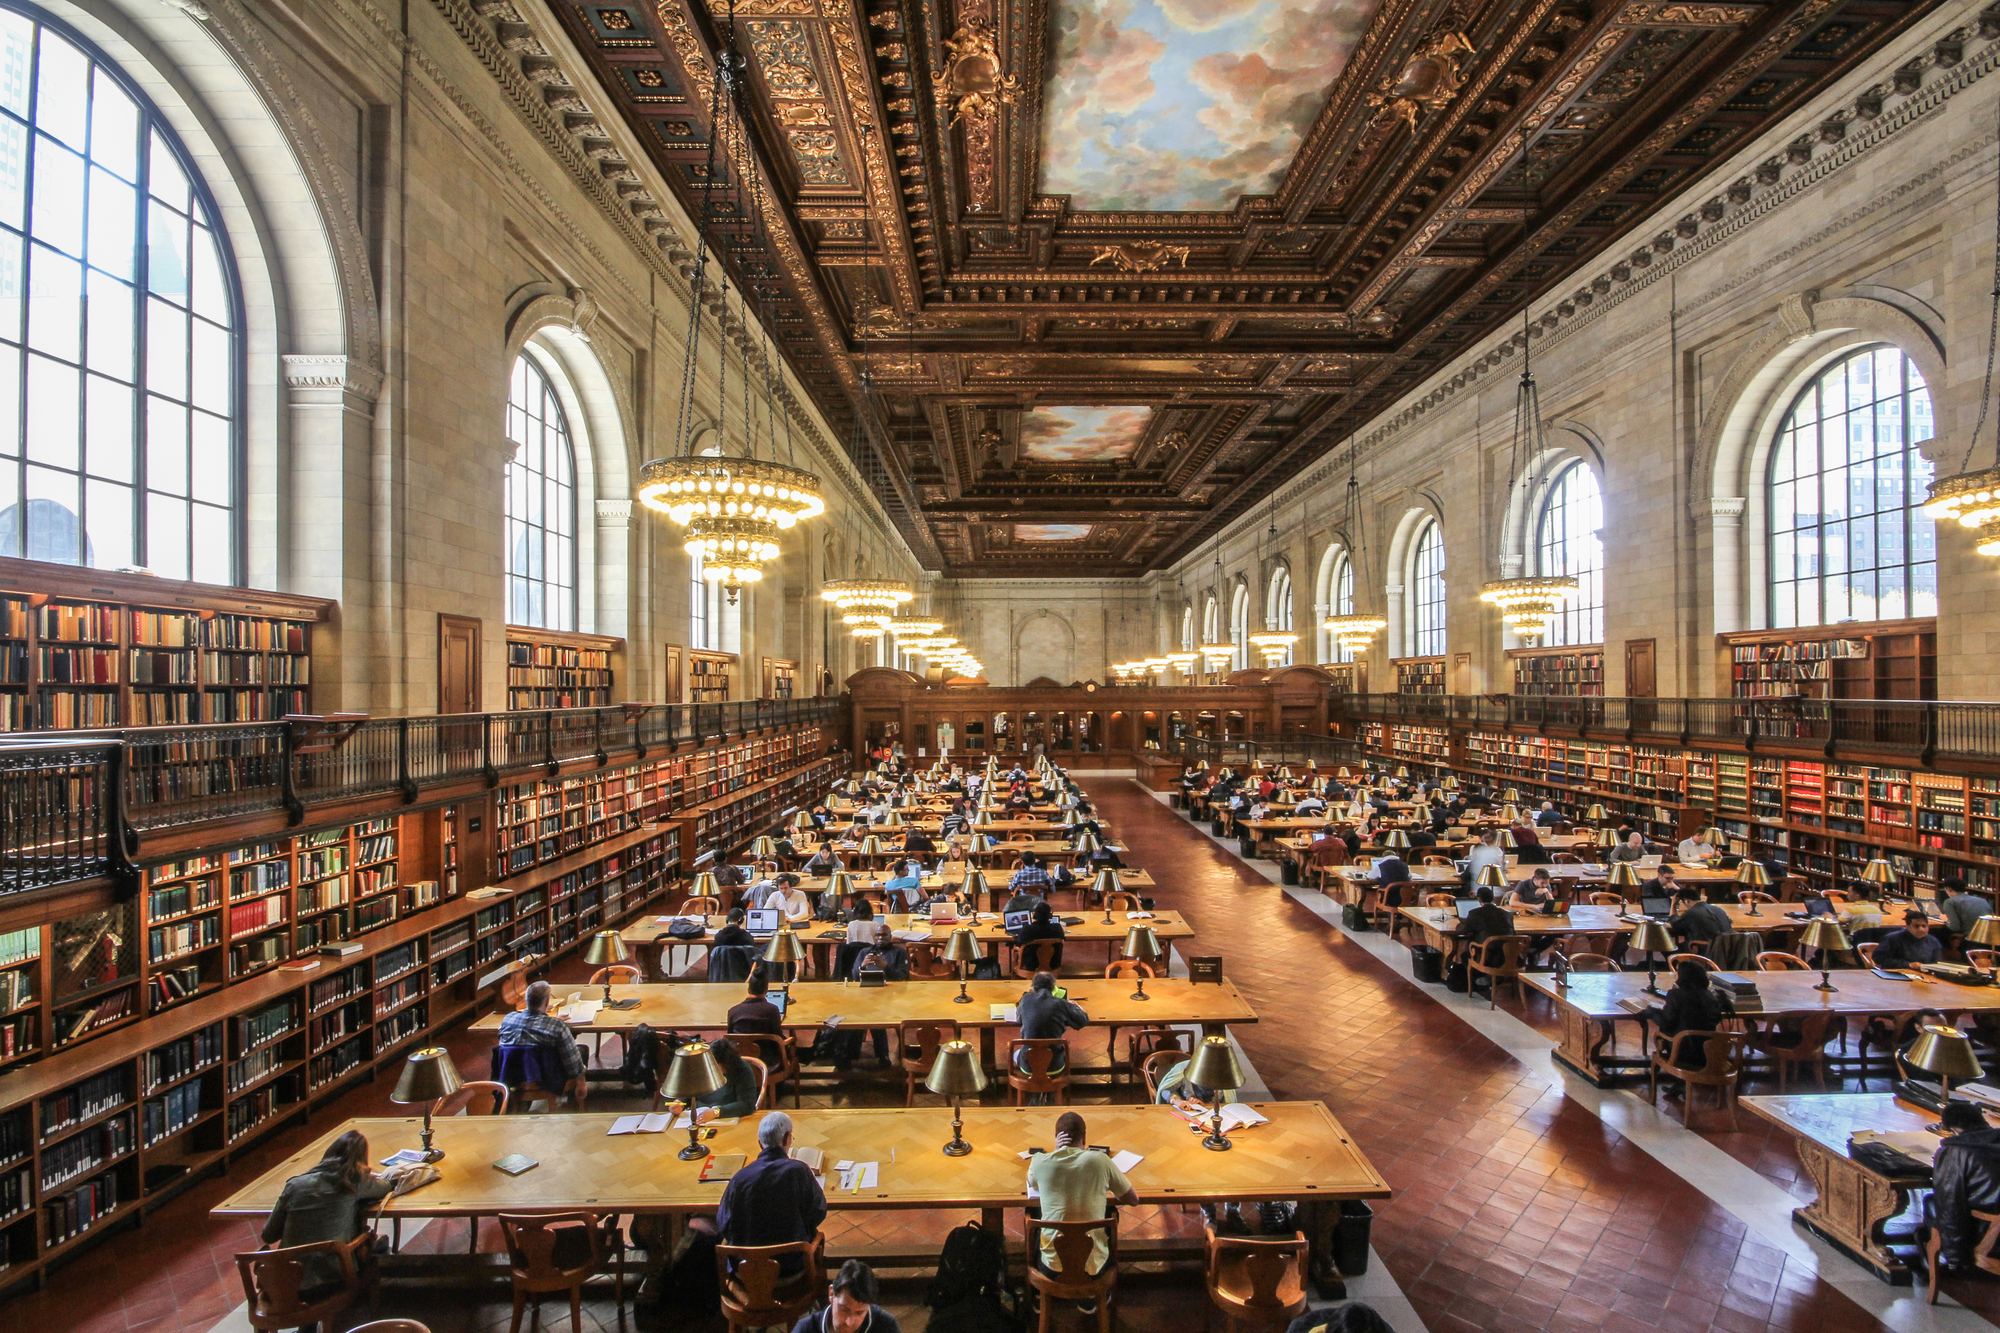 The Rose Main Reading Room